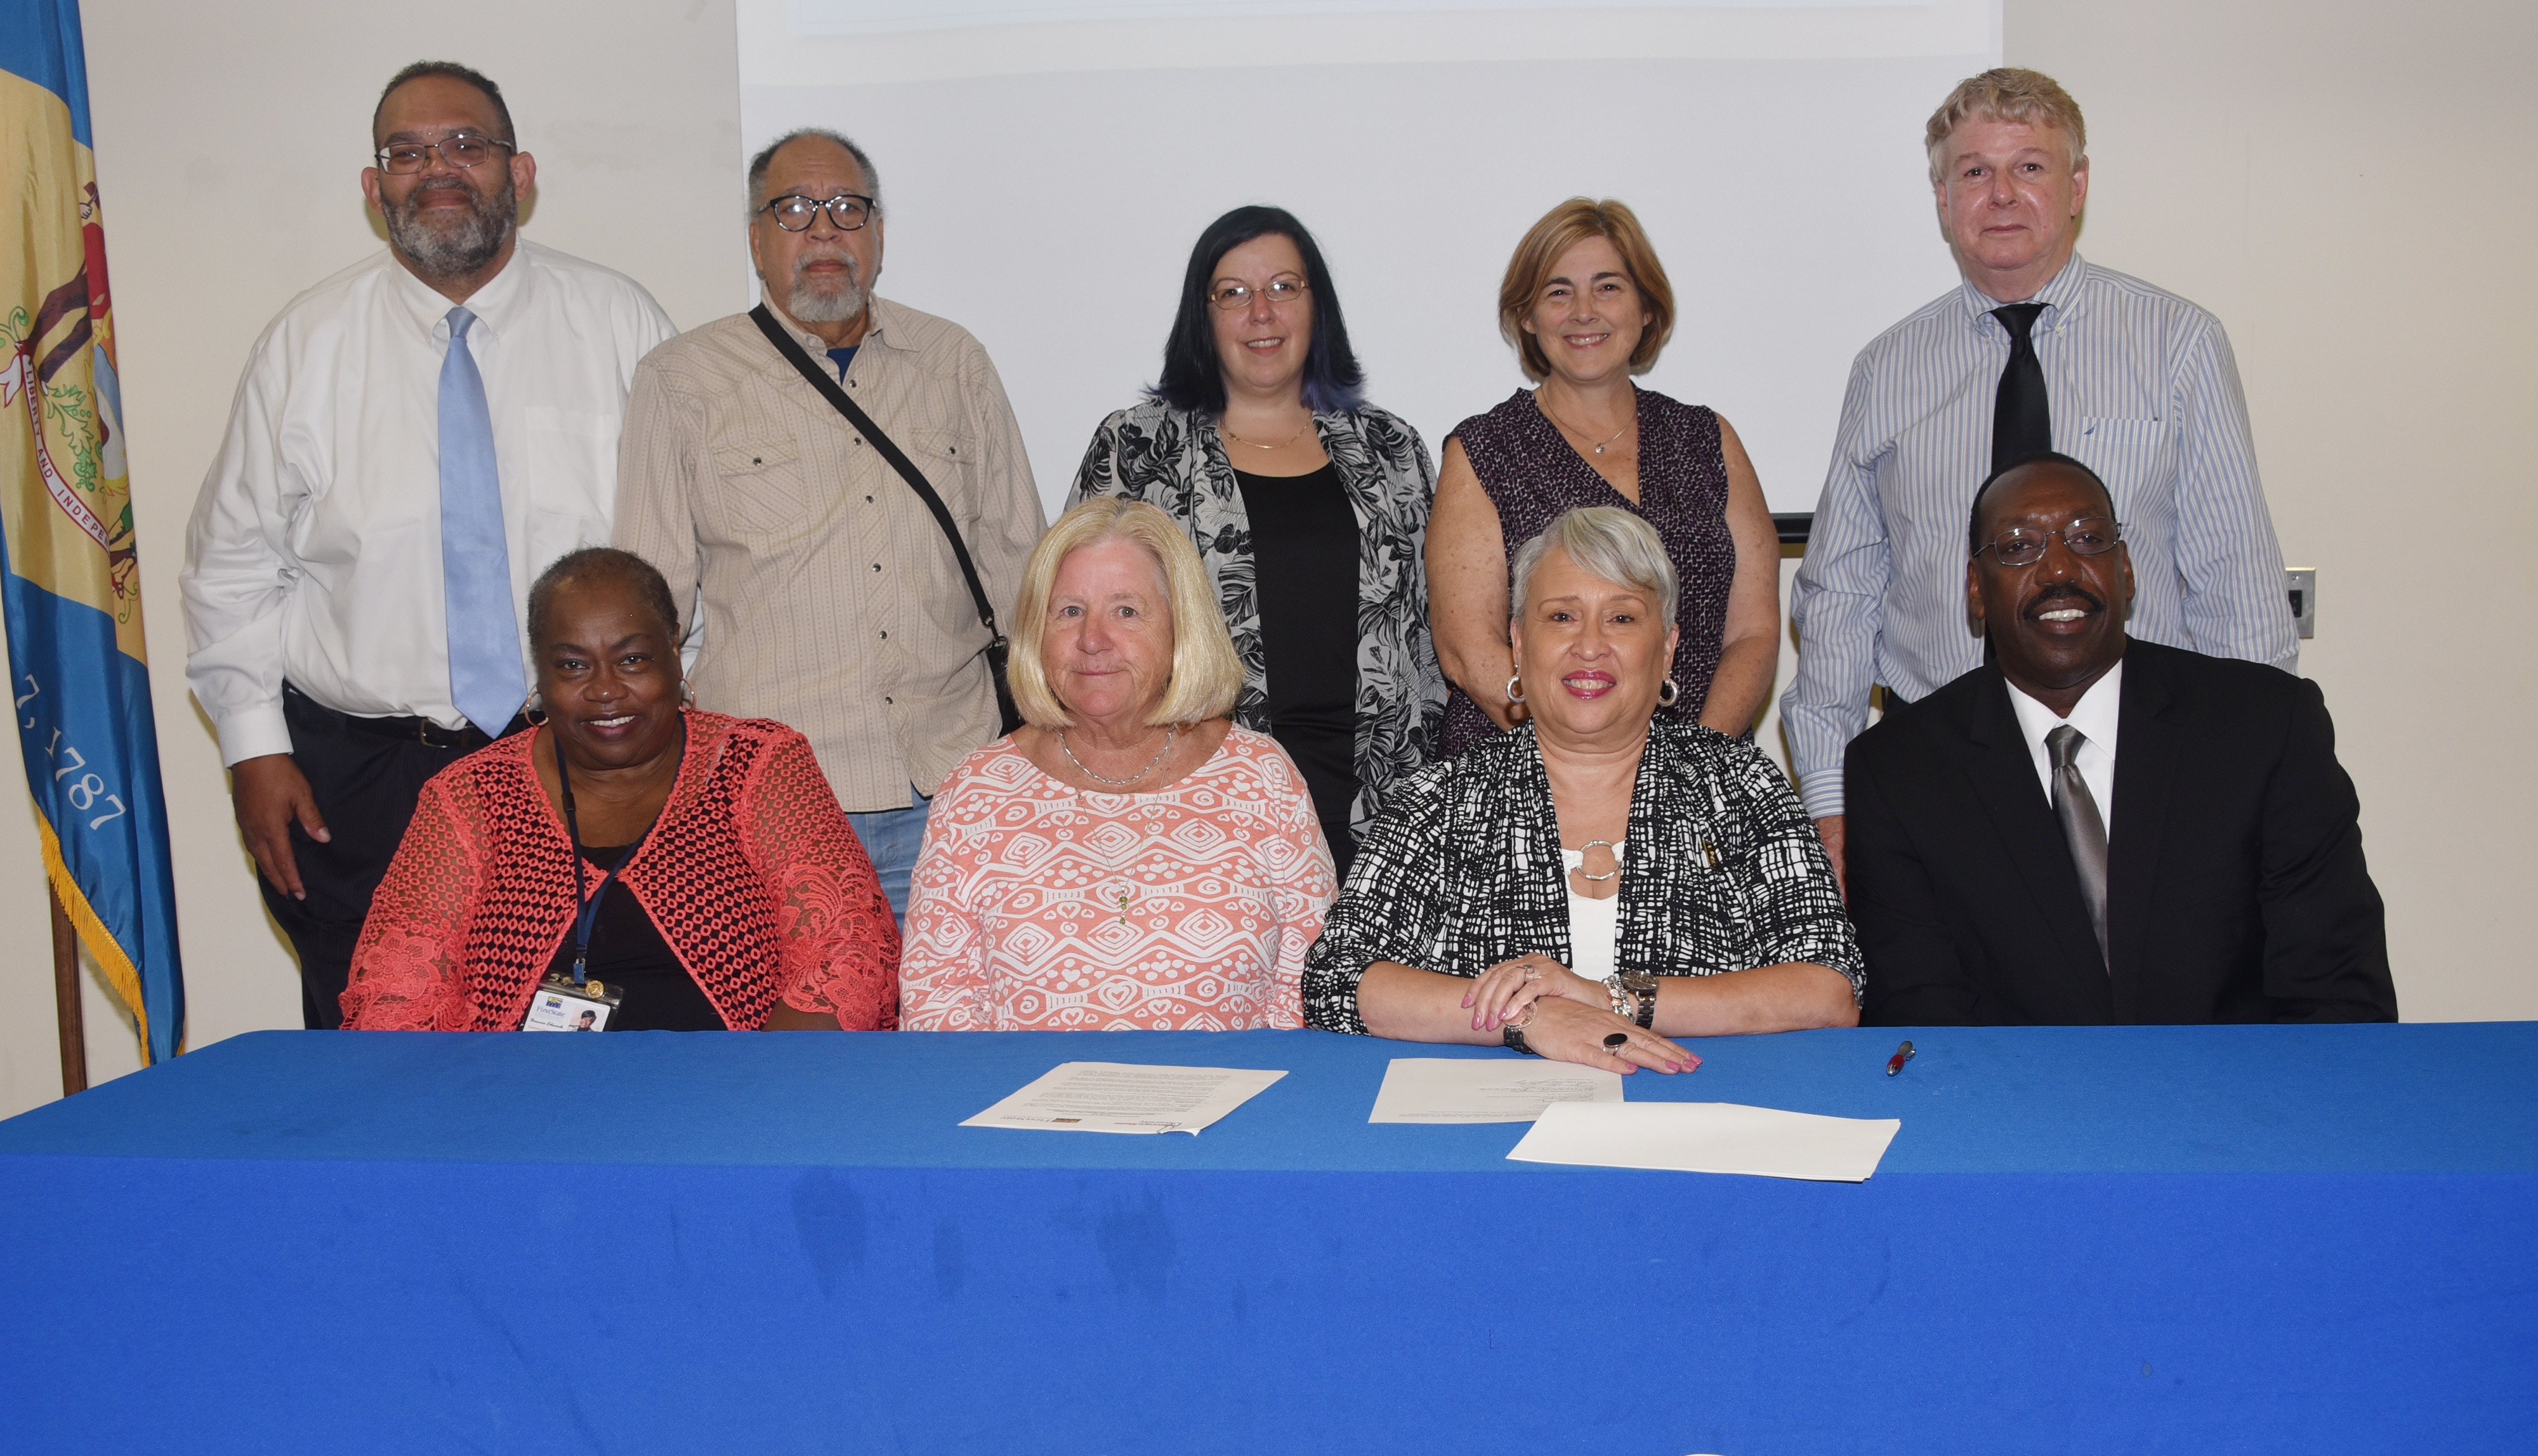 (Seated l-r) FSCAA's Bernice Edwards, exec. director, and Dr. Anne Farley, board president; DSU's Dr. Patrice Gilliam-Johnson, dean of Graduate, Adult and Extended Studies, and Dr. Darren Blackston, DSU@Georgetown director. (Standing) FSCAA officials Bruce Wright, Cagney J. France and Jaime Sayler; DSU's Lisa Perelli; and Brad Whaley of the Sussex County Office of Community Development pose after the signing.